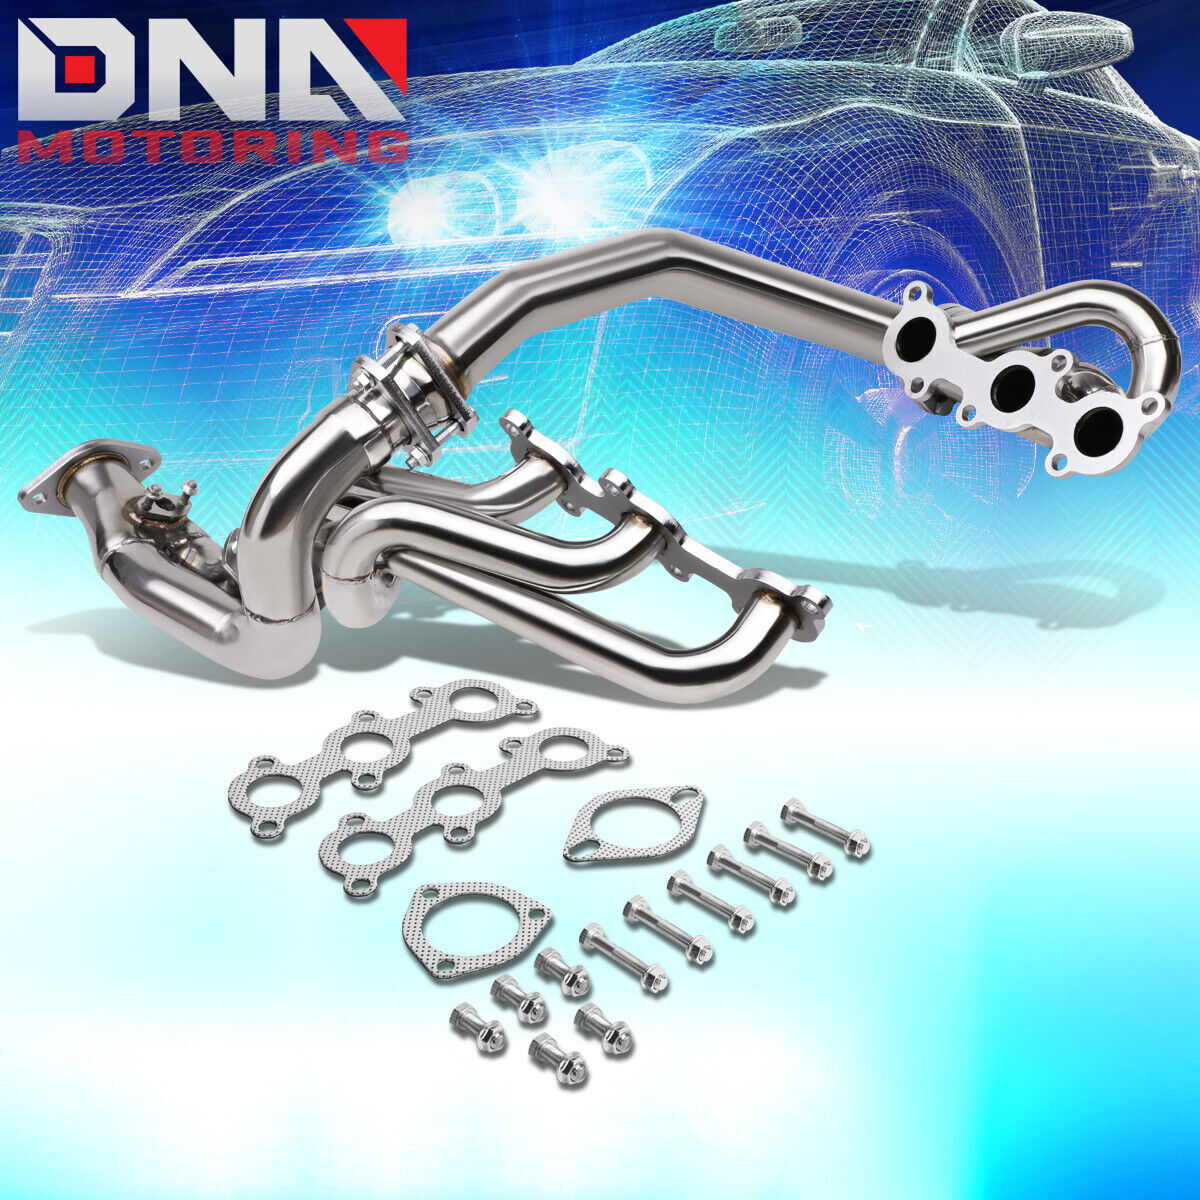 FOR 95-04 TACOMA/T100 3.4 STAINLESS PERFORMANCE HEADER EXHAUST MANIFOLD+Y-PIPE